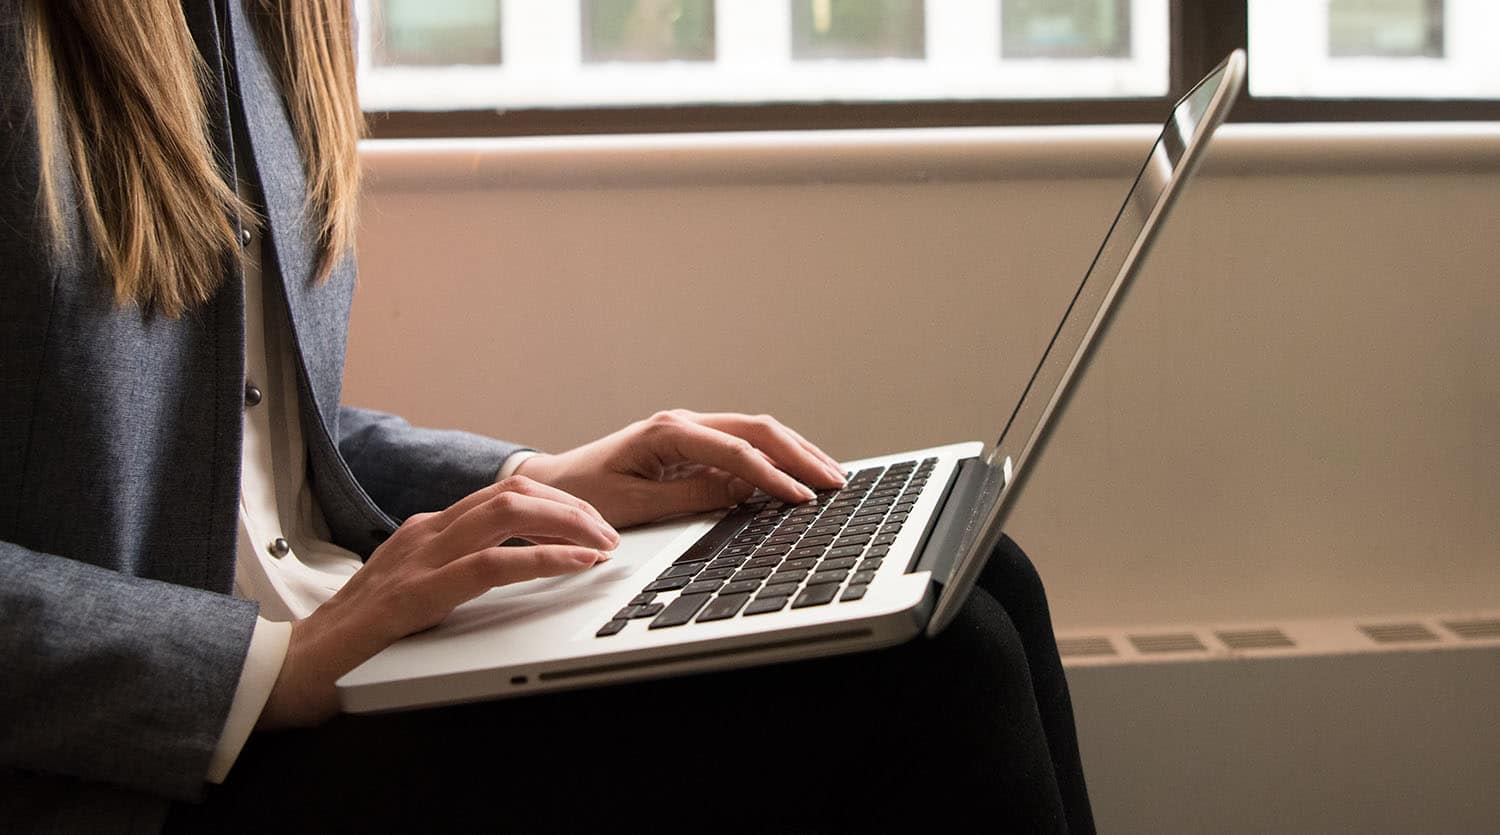 Close up image of a woman using her laptop.